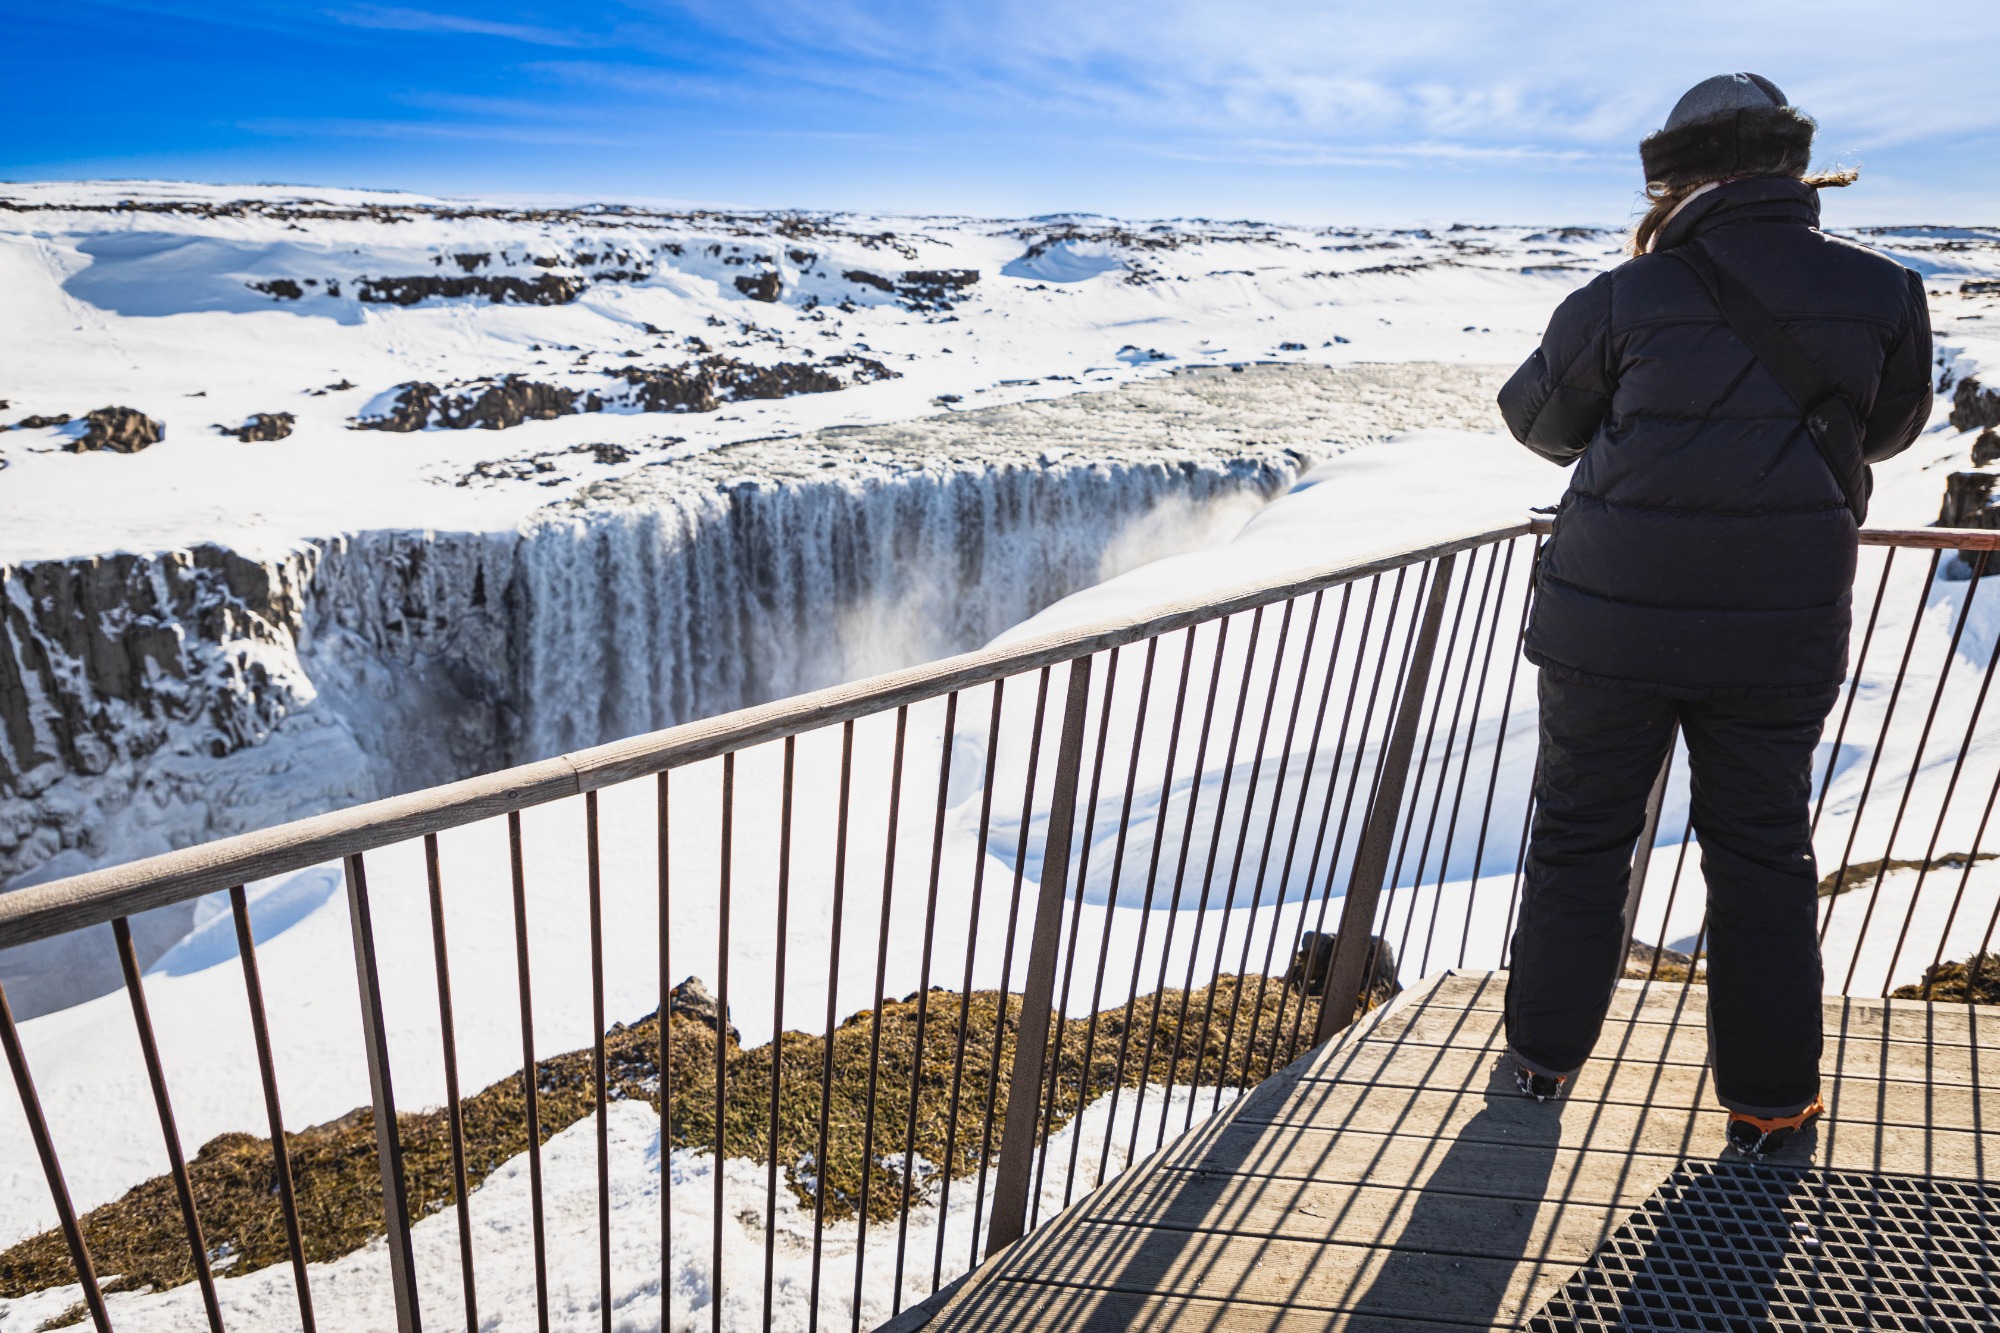 Viewing platform in front of Dettifoss Waterfall in North Iceland